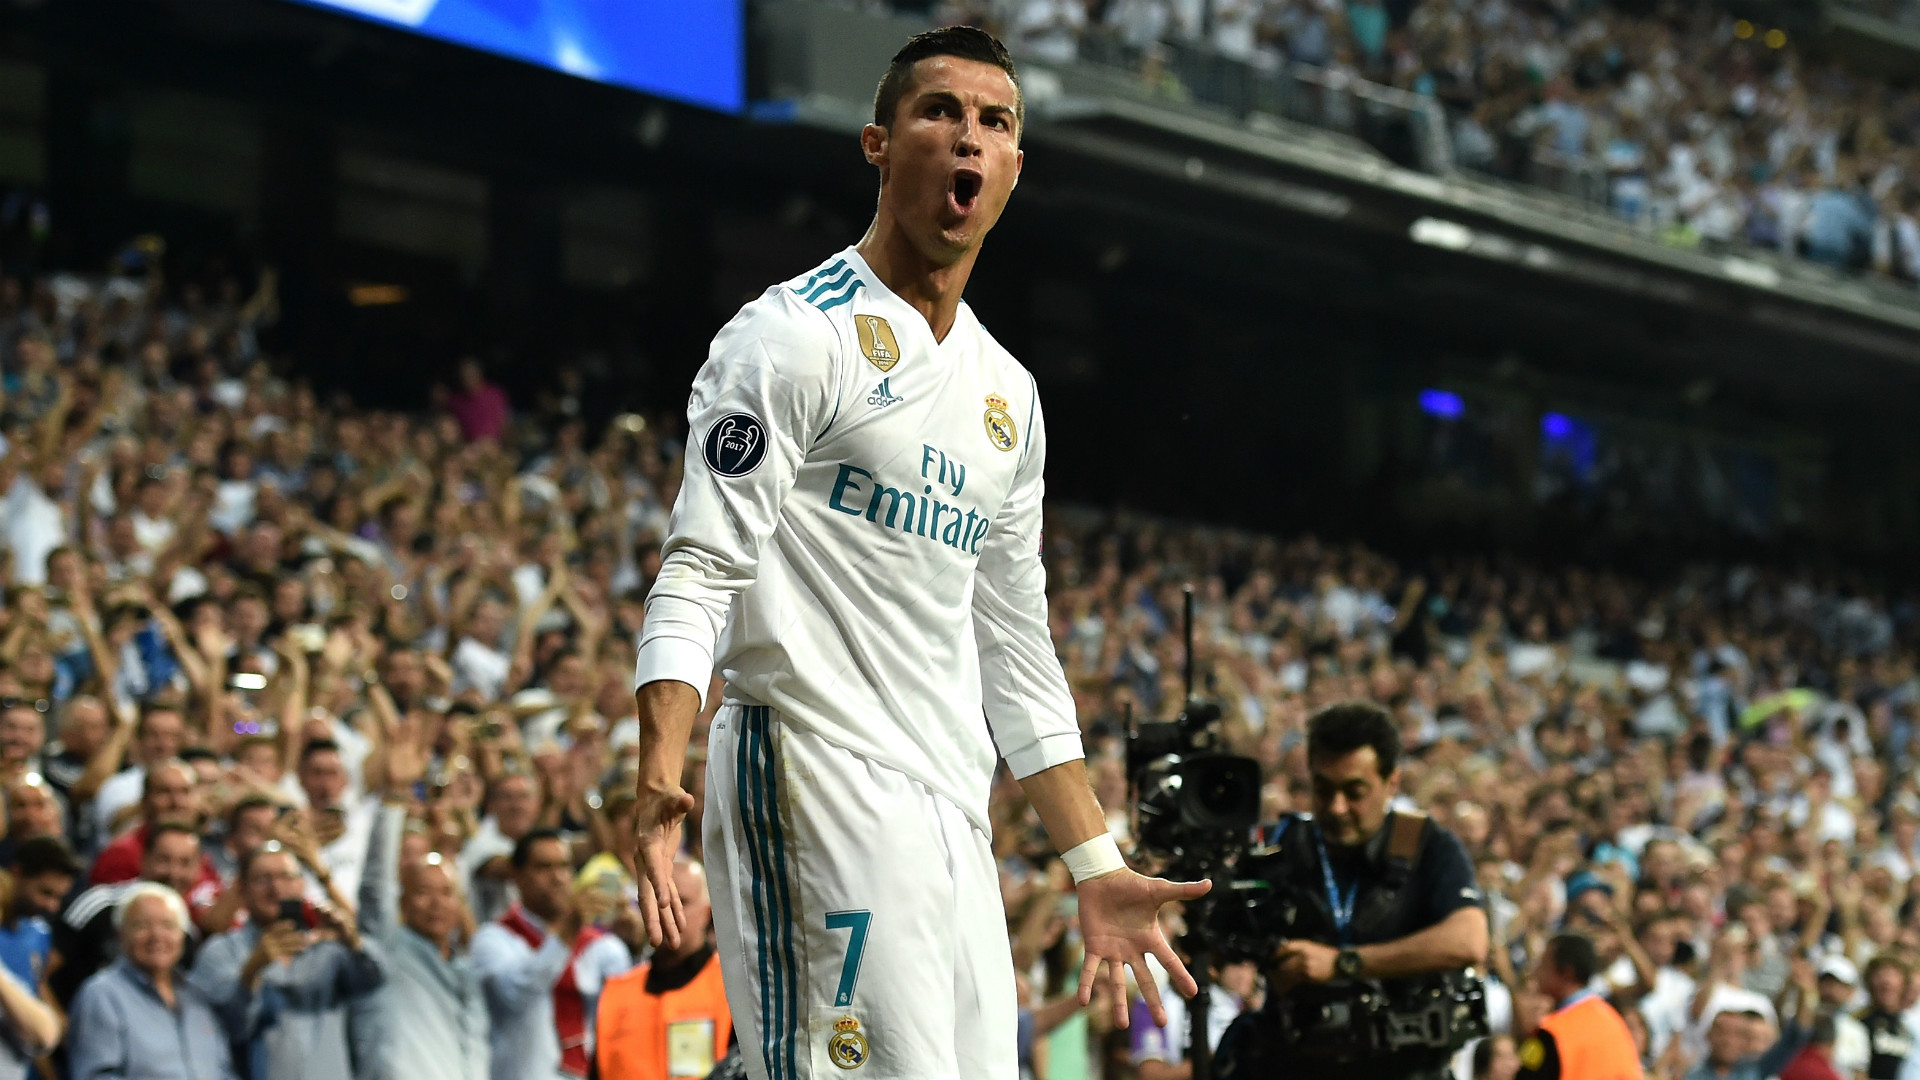 94 wins, 112 goals – the amazing numbers behind Ronaldo's 150 UEFA club games